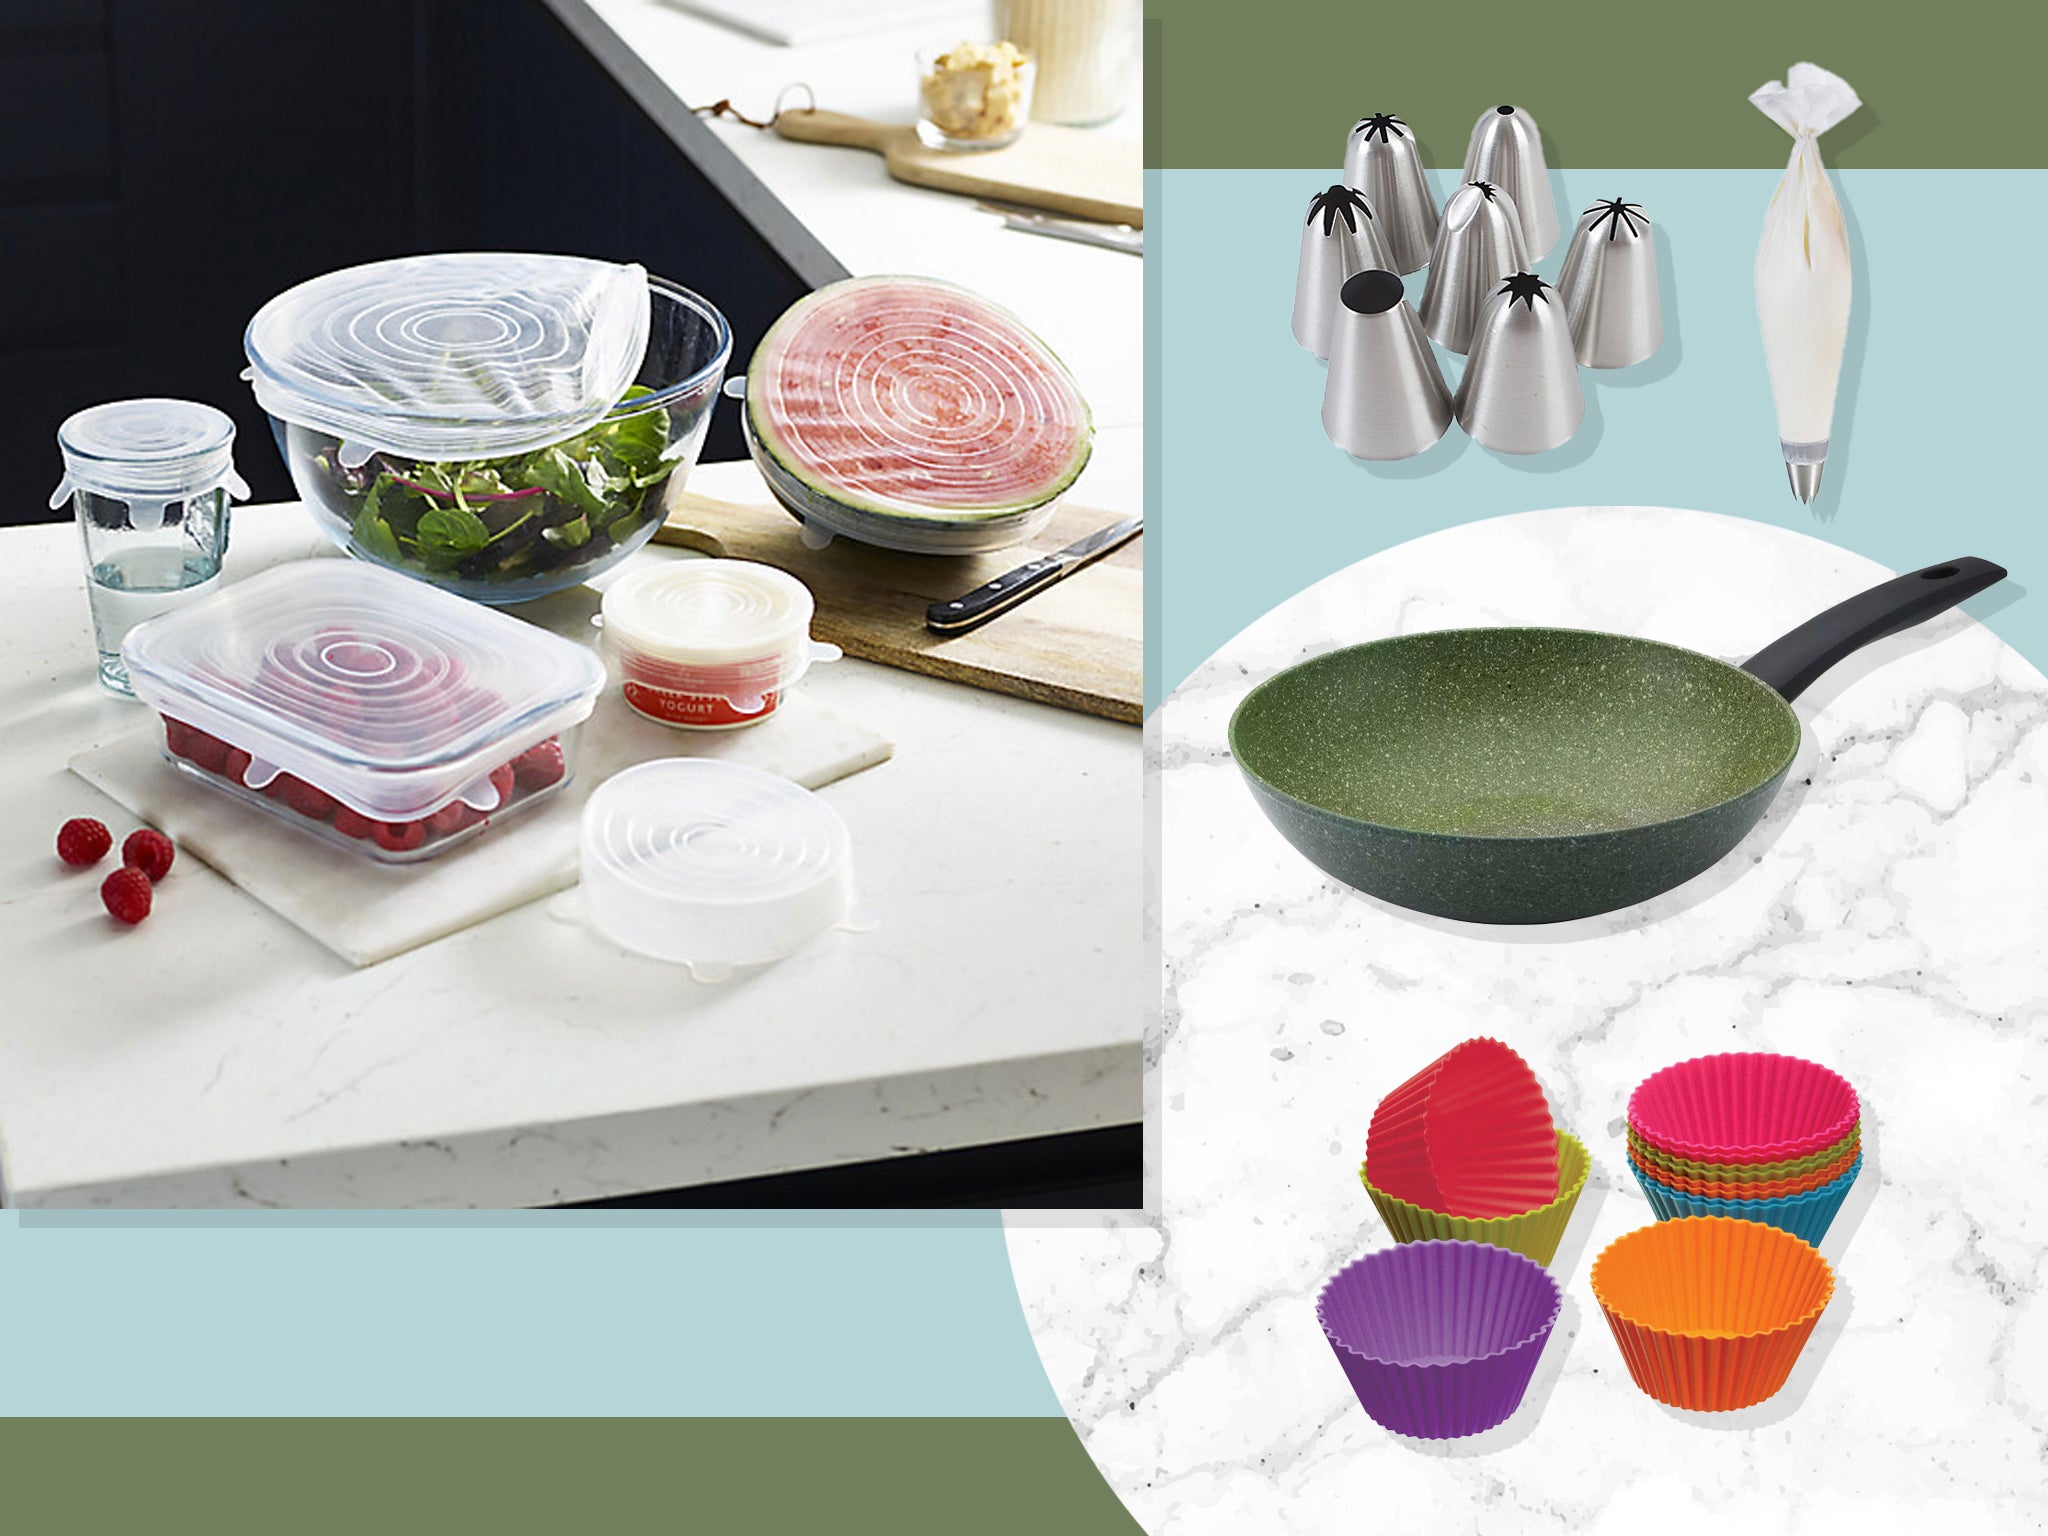 https://static.independent.co.uk/2021/04/20/14/Sustainable%20kitchen%20products.jpg